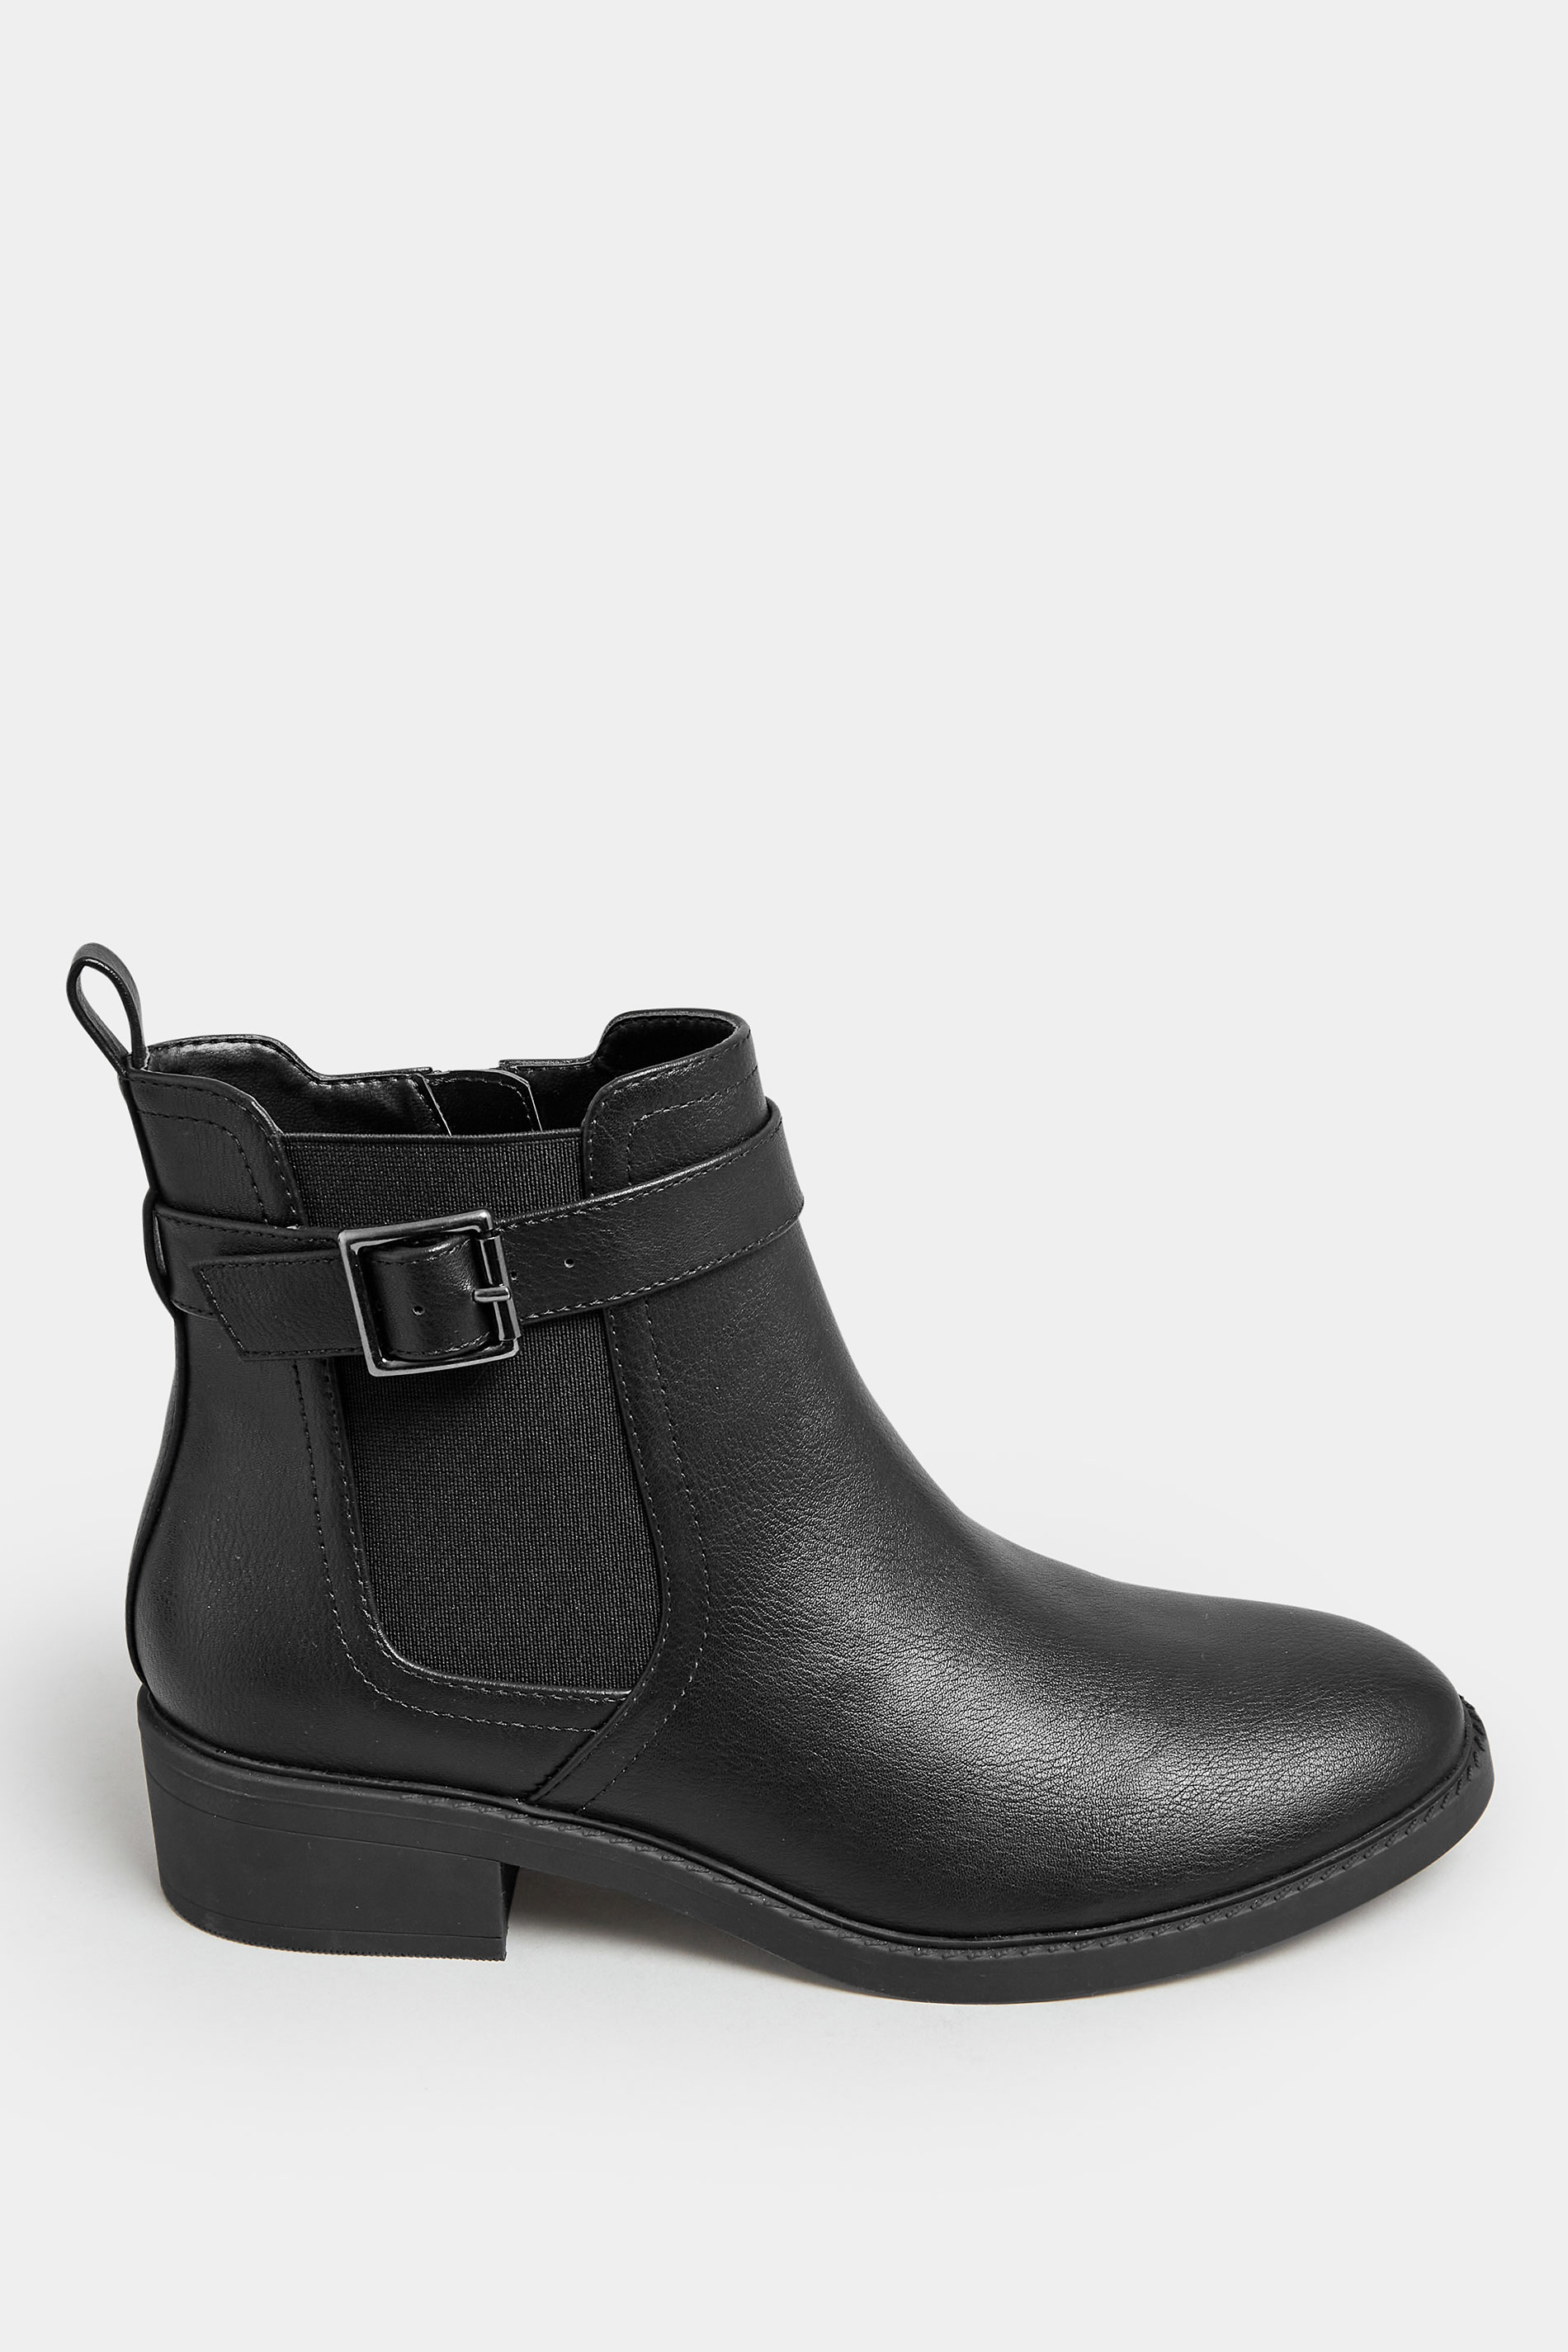 Black Buckle Faux Leather Ankle Boots In Wide E Fit & Extra Wide EEE Fit | Yours Clothing 3